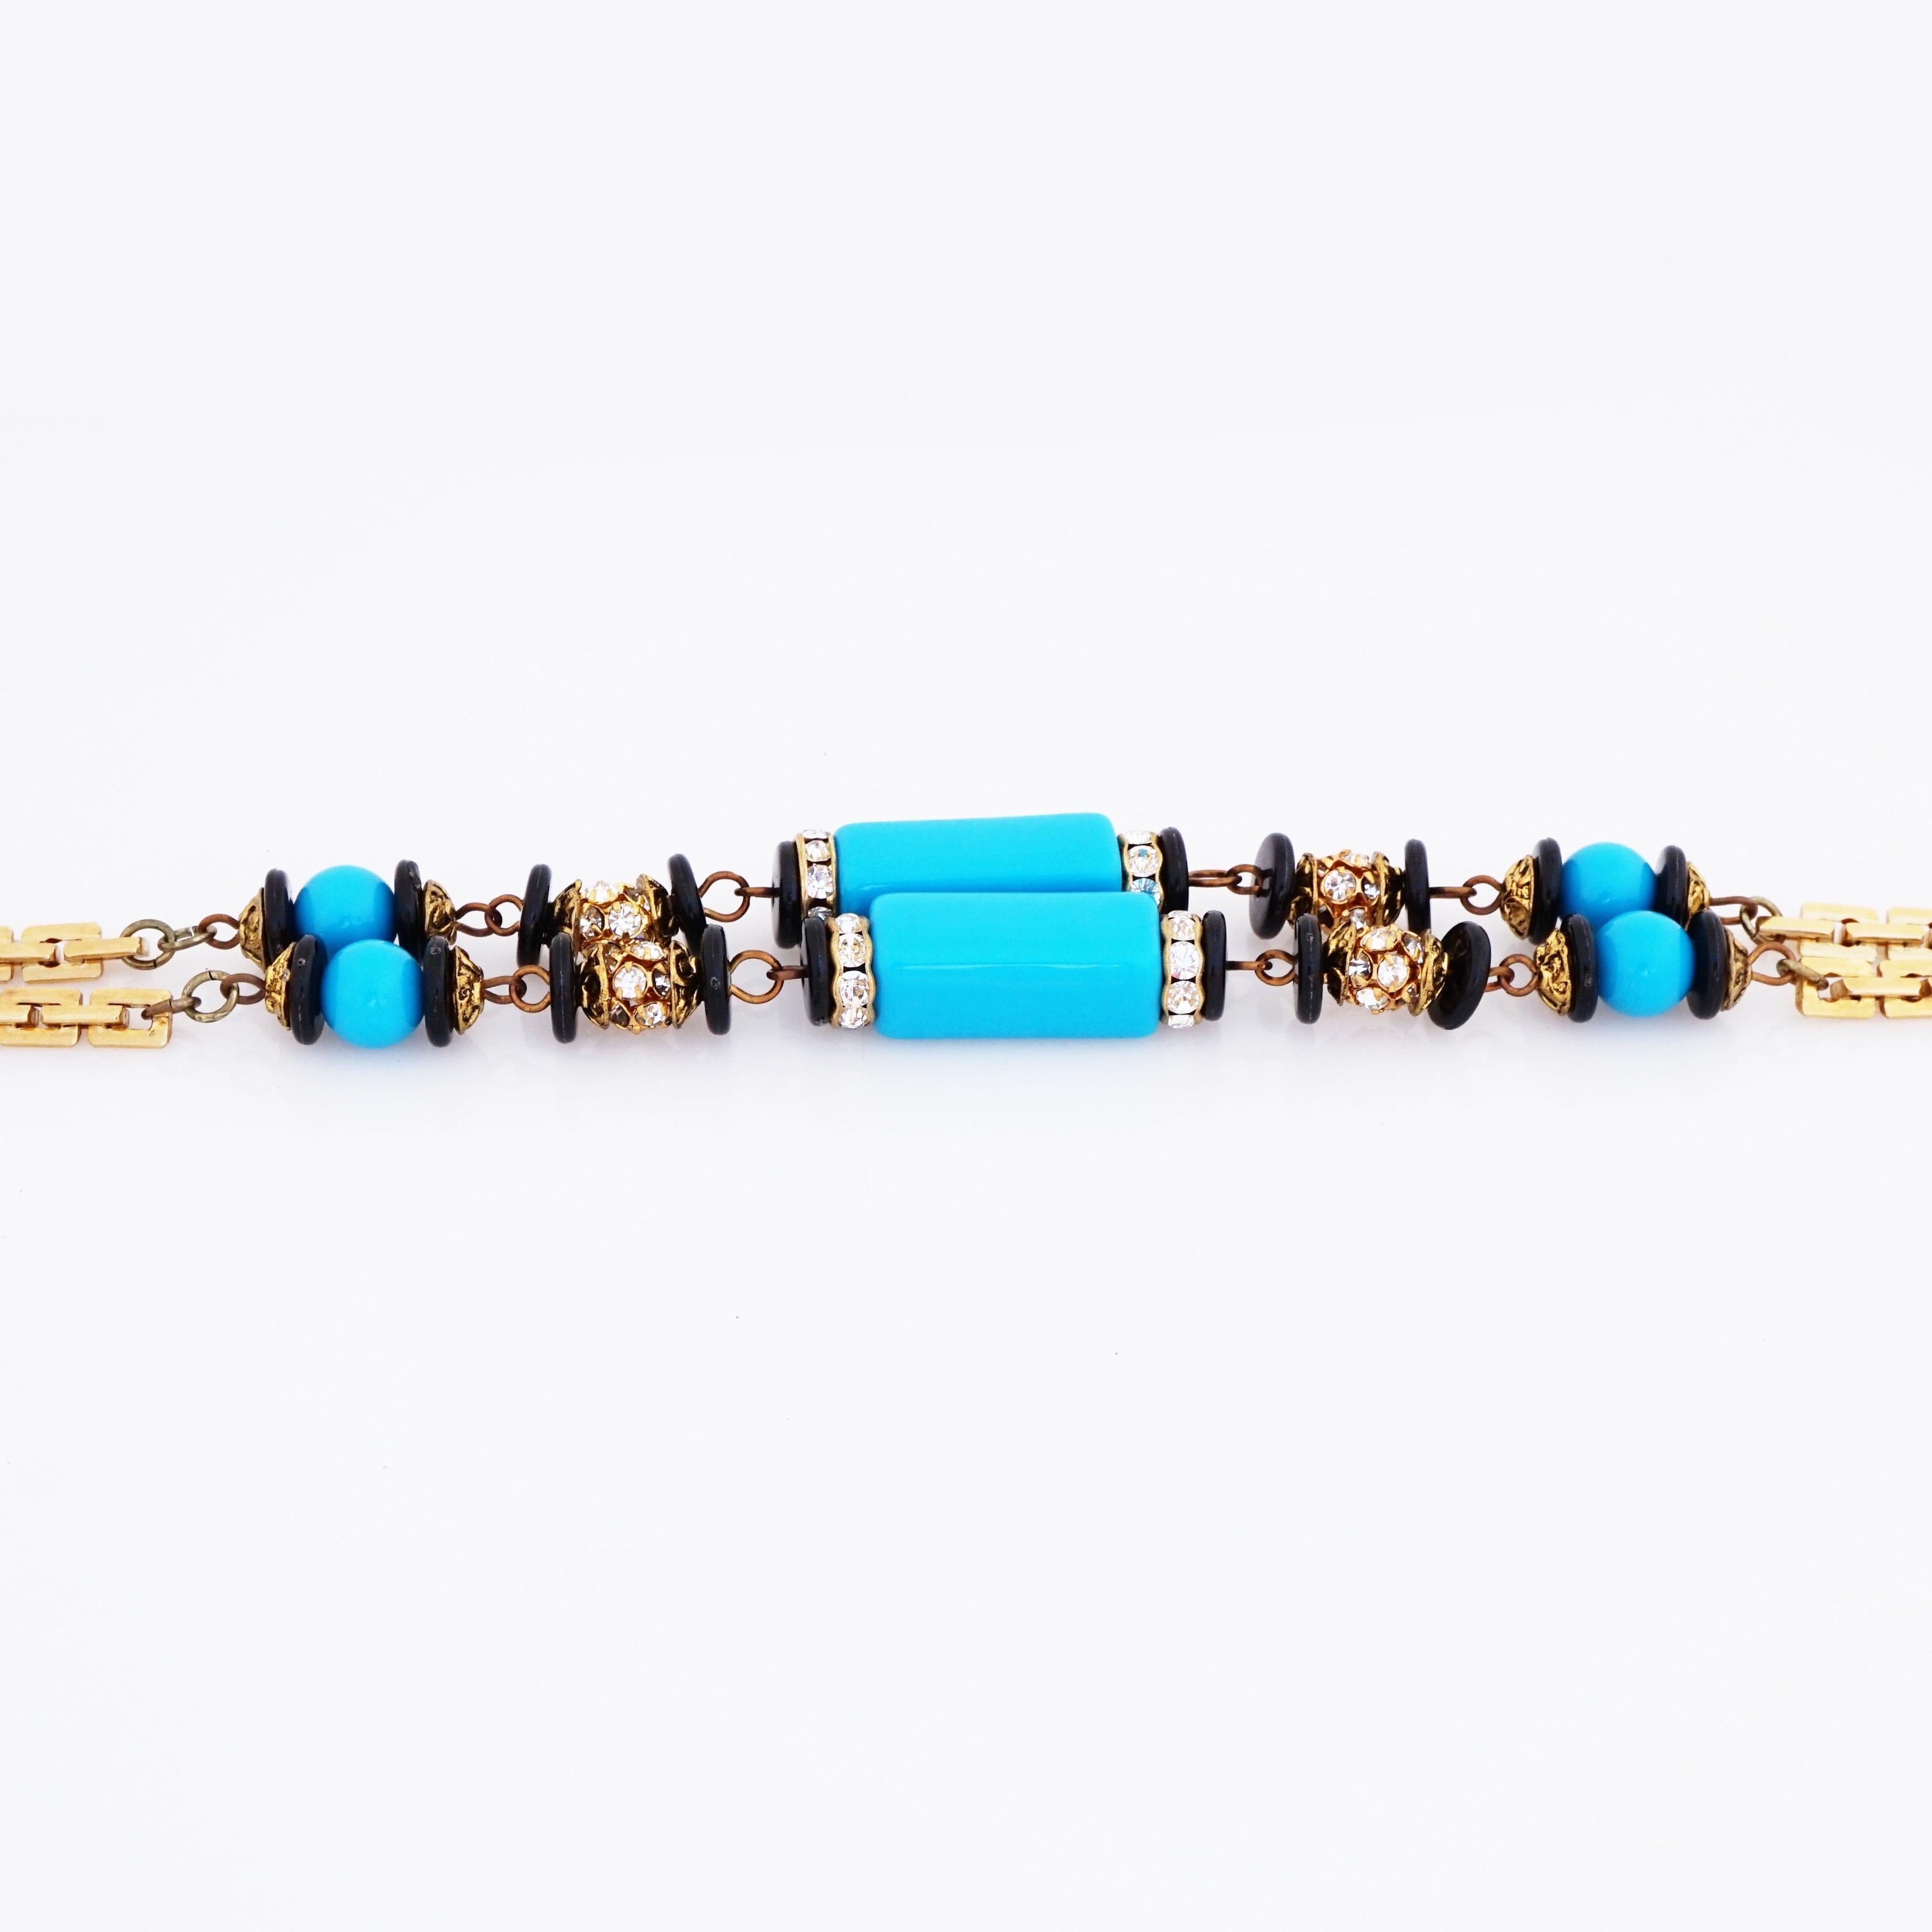 Modern Turquoise and Onyx Beaded Tassel Statement Necklace By Lawrence Vrba, 1970s For Sale